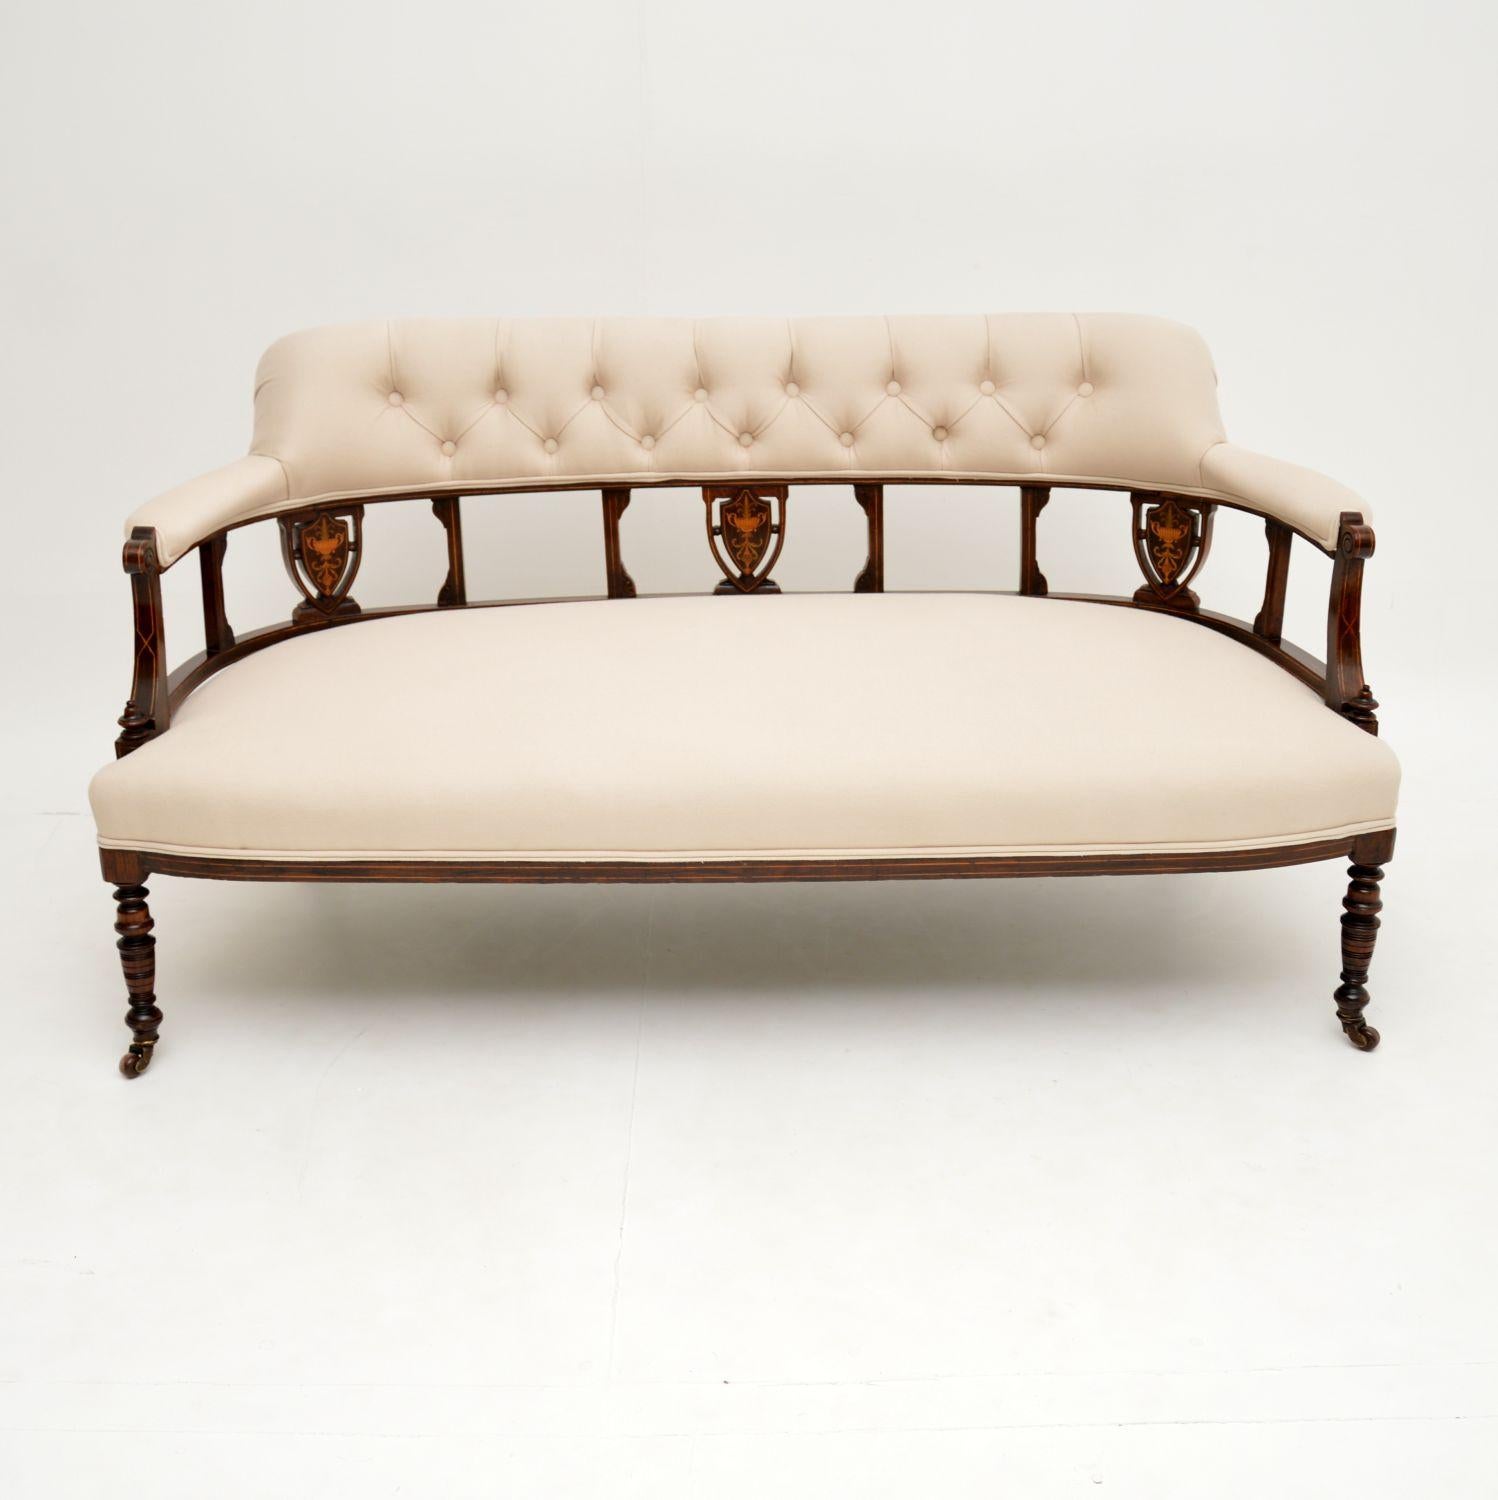 A stunning antique settee dating from the 1890-1900 period. This is finely made from solid wood, with beautiful satin wood inlays.

It is well built, sturdy and sound, it sits on beautifully turned legs terminating in original porcelain